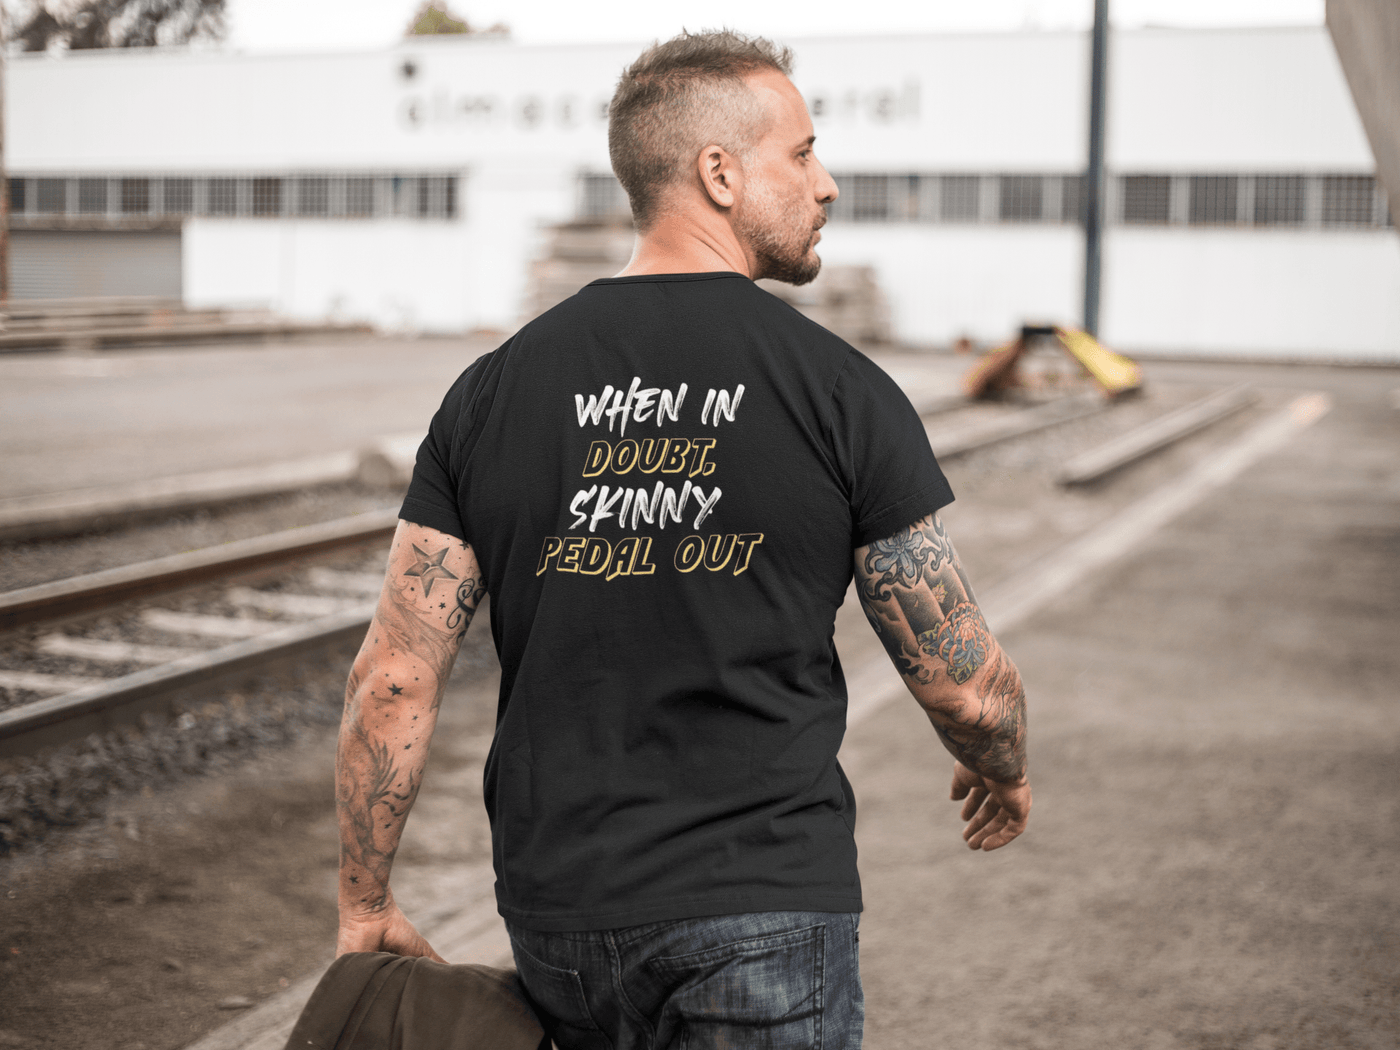 Big and Tall-When in Doubt, Skinny Pedal Out Offroad Shirt - Goats Trail Off-Road Apparel Company